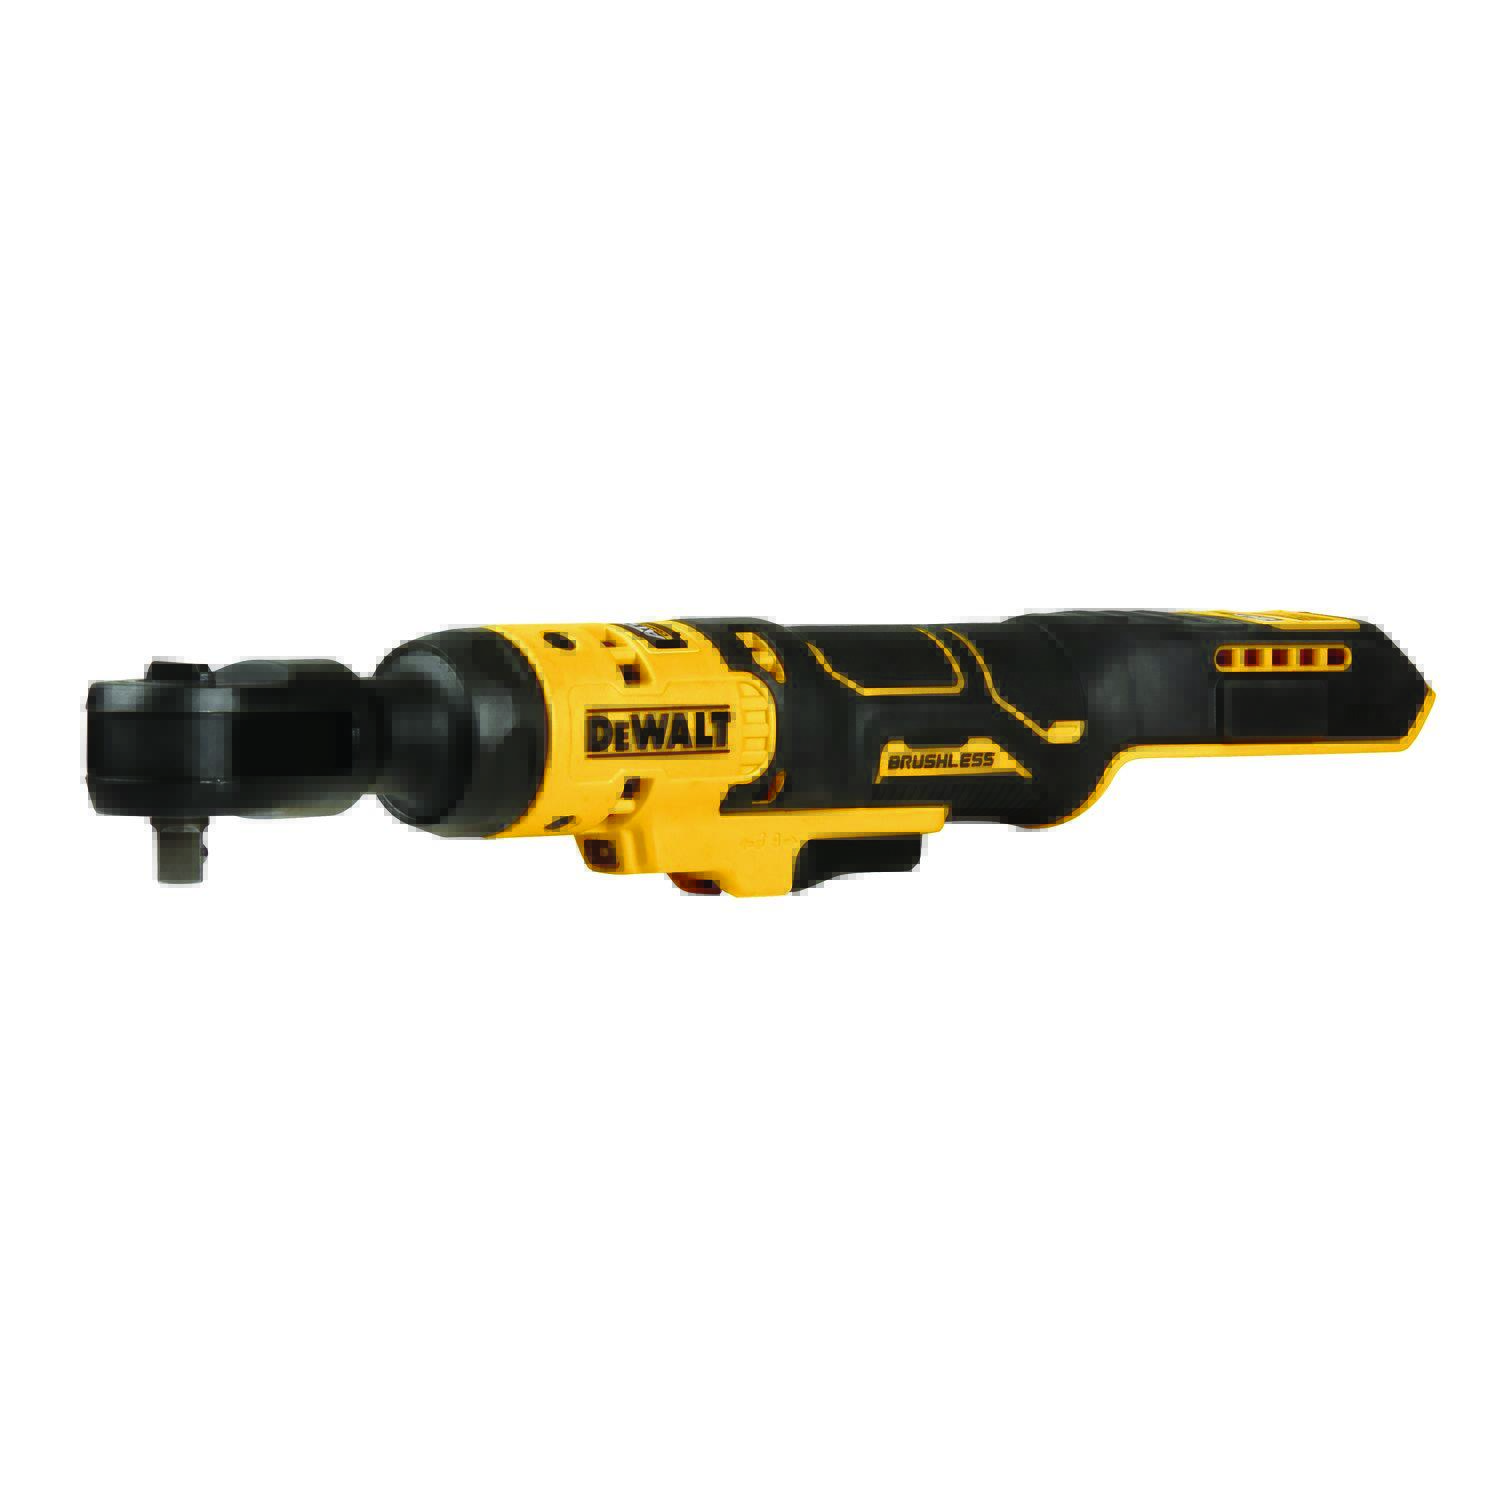 The Best DeWalt Tools at The Home Depot: 3/8-Inch Cordless Ratchet